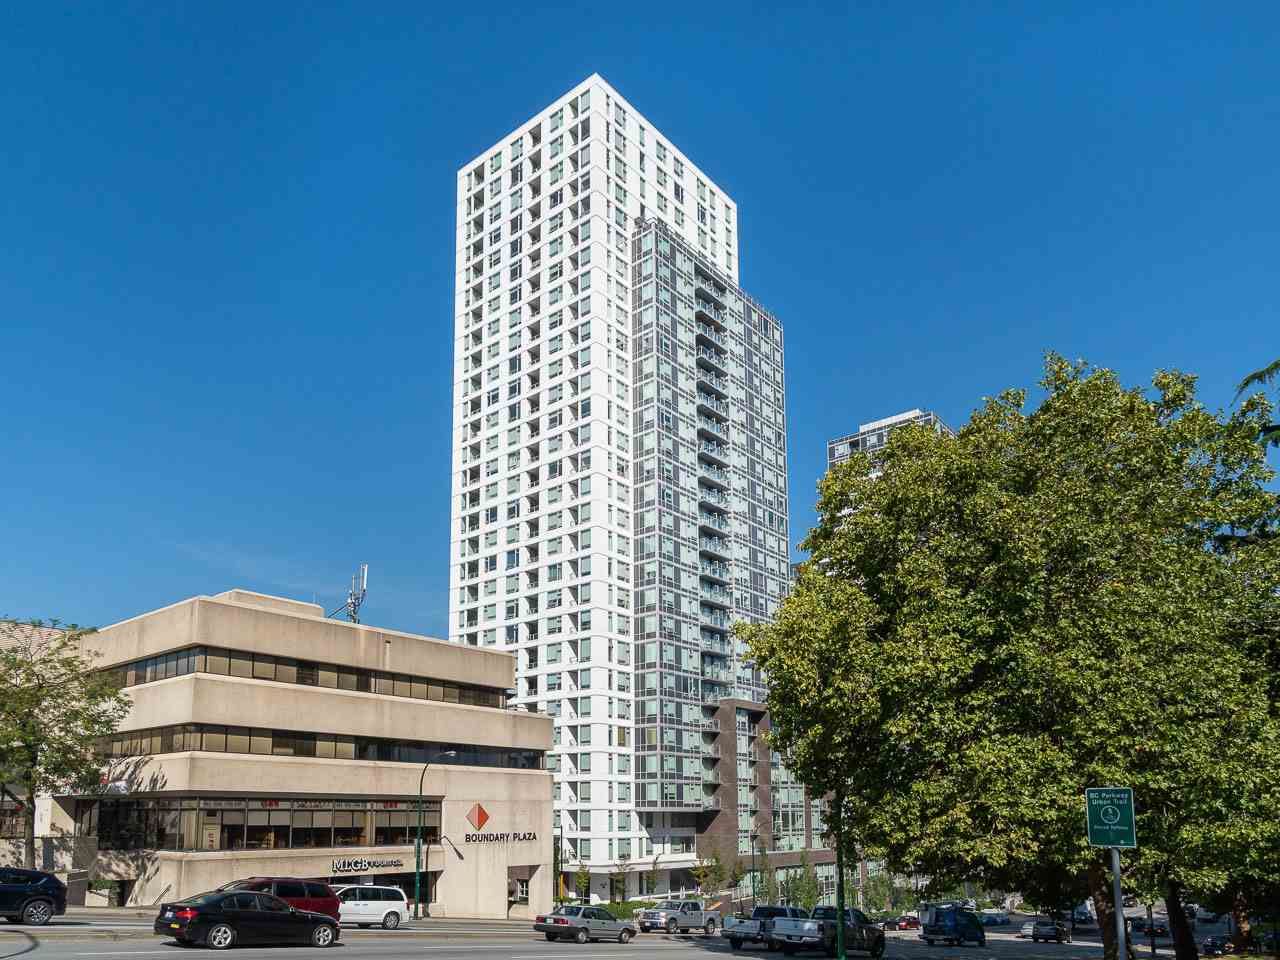 Main Photo: 1012 5665 BOUNDARY ROAD in Vancouver: Collingwood VE Condo for sale (Vancouver East)  : MLS®# R2314218